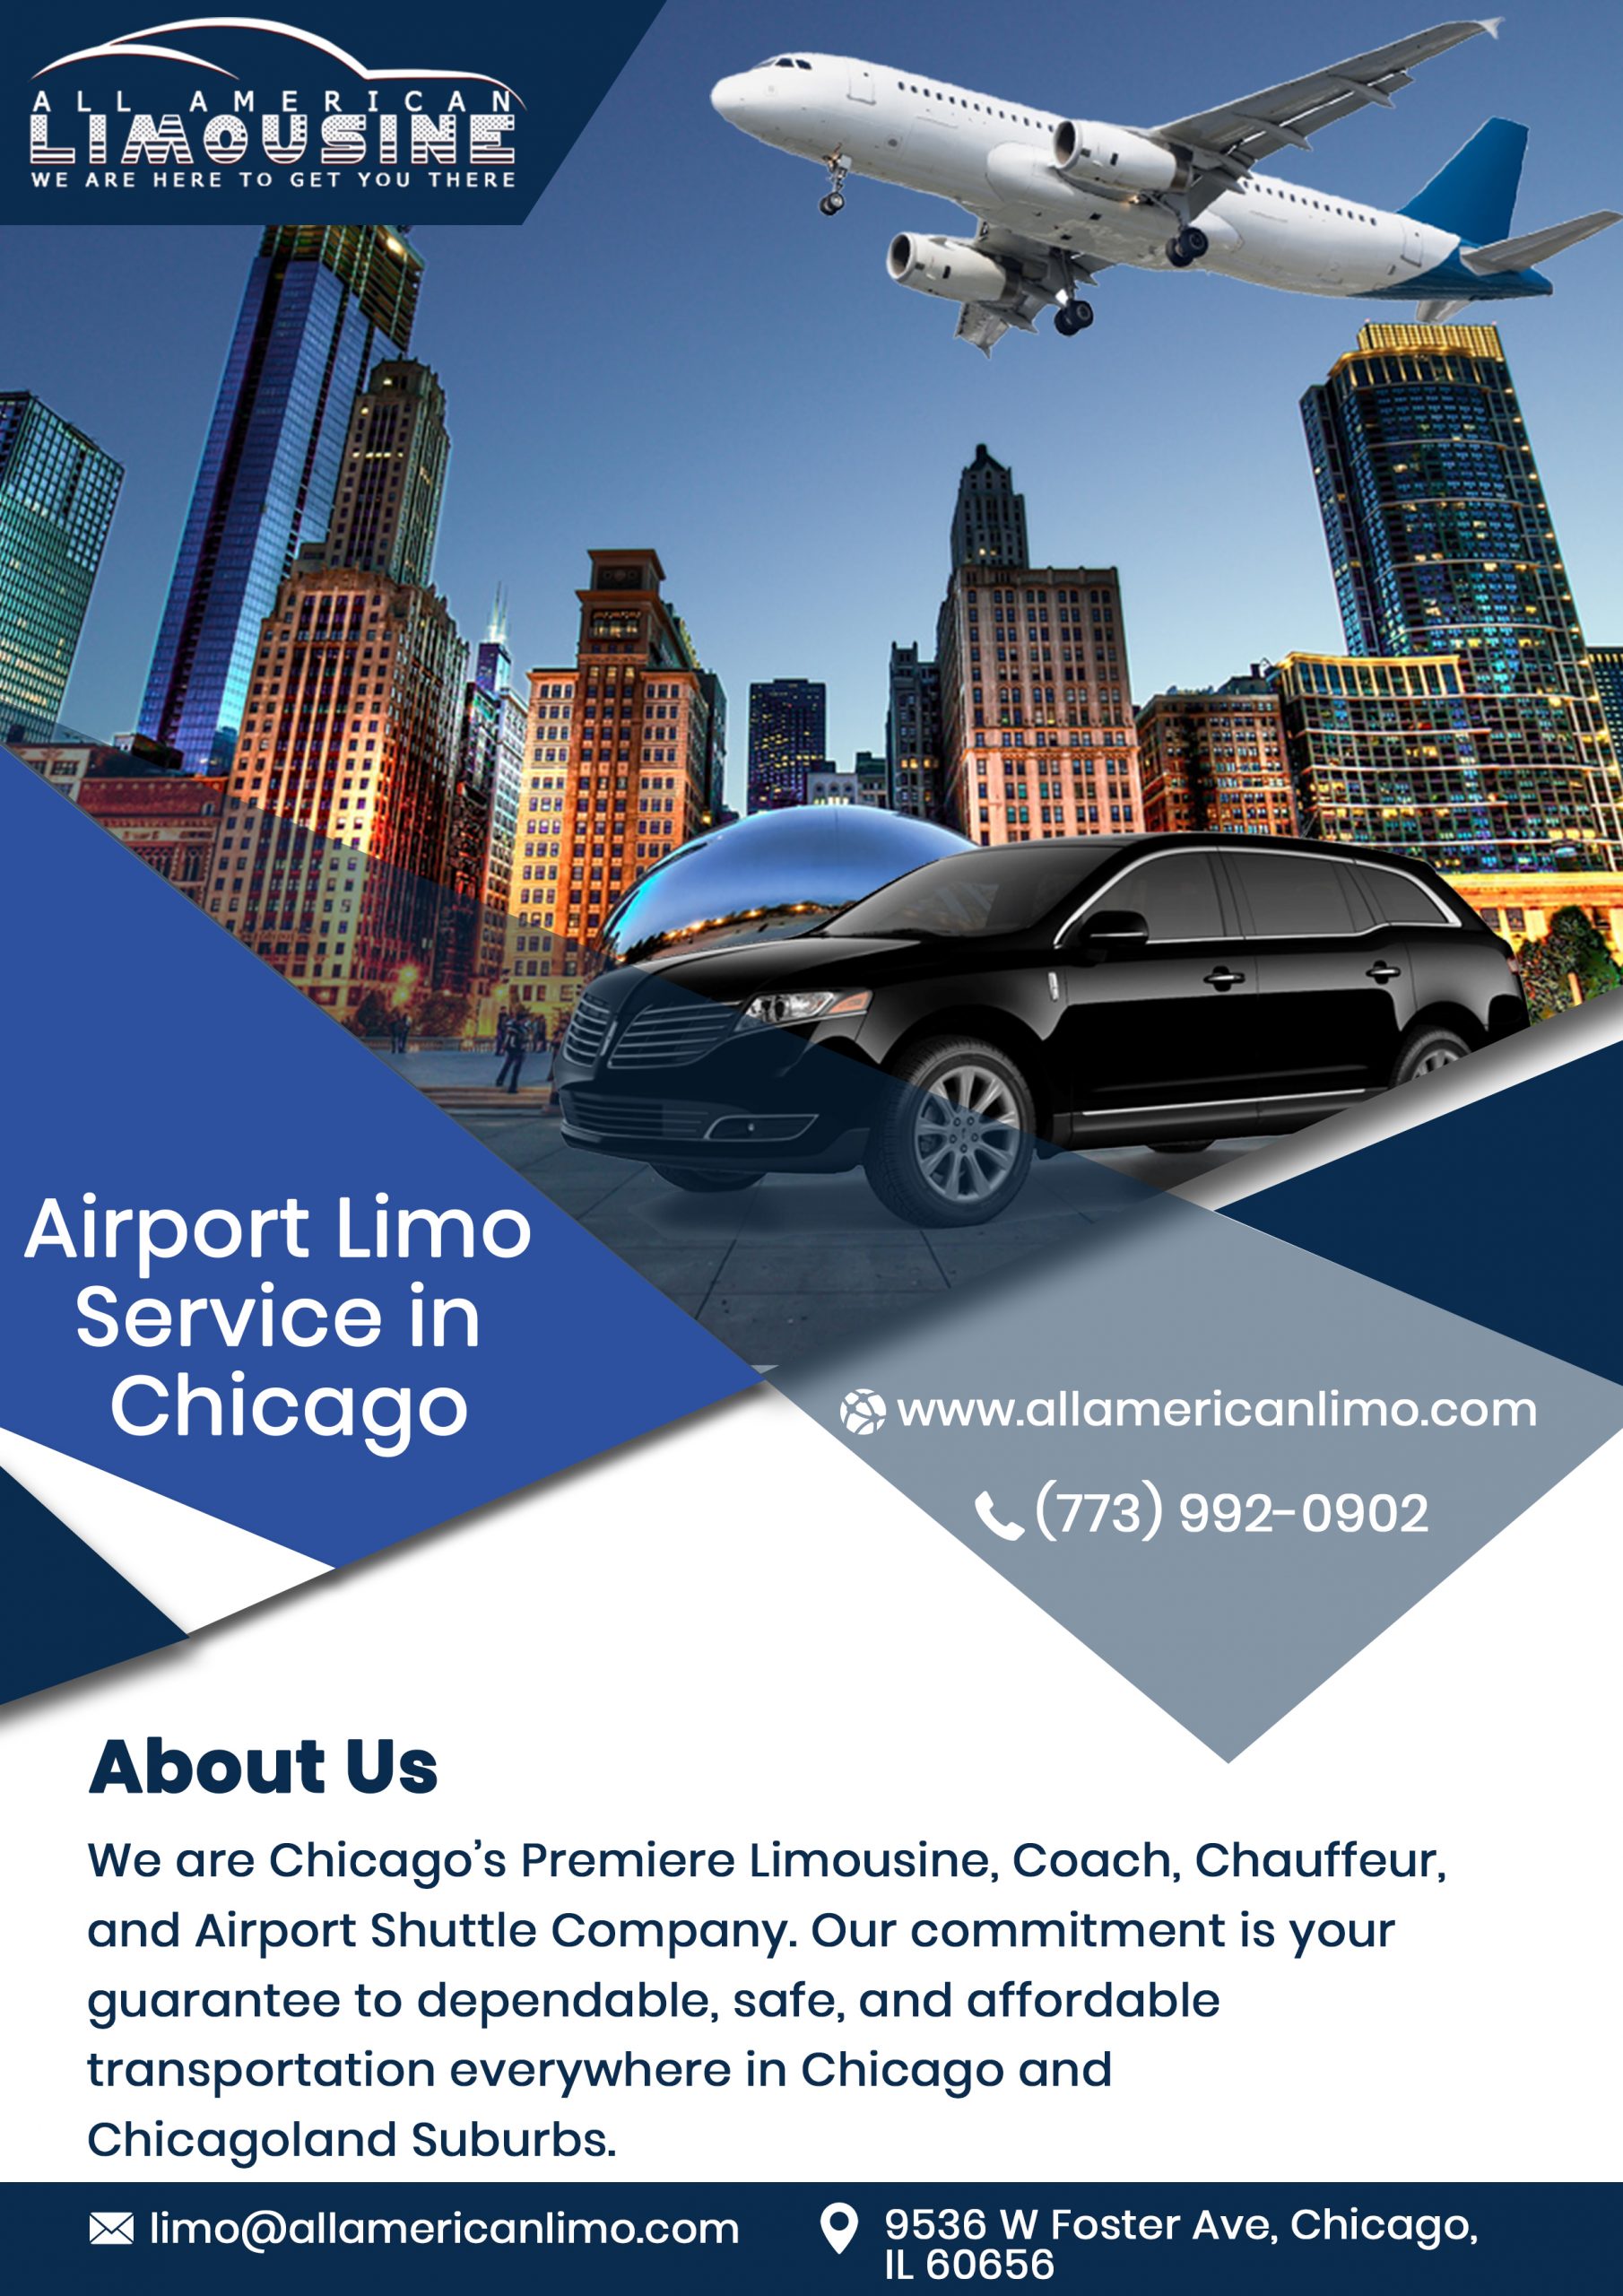 Chicago Car Service Near Me 60613, Party Bus 60613, Mercedes Sprinter Limo to 60613, Chicago Limo 60613, Limo Service 60613 to Airport, Hire, Rent, Get, Find, Car Service 60613 to Airport, Transportation Service 60613 to O'Hare, Corporate Travel 60613, Airport Travel 60613